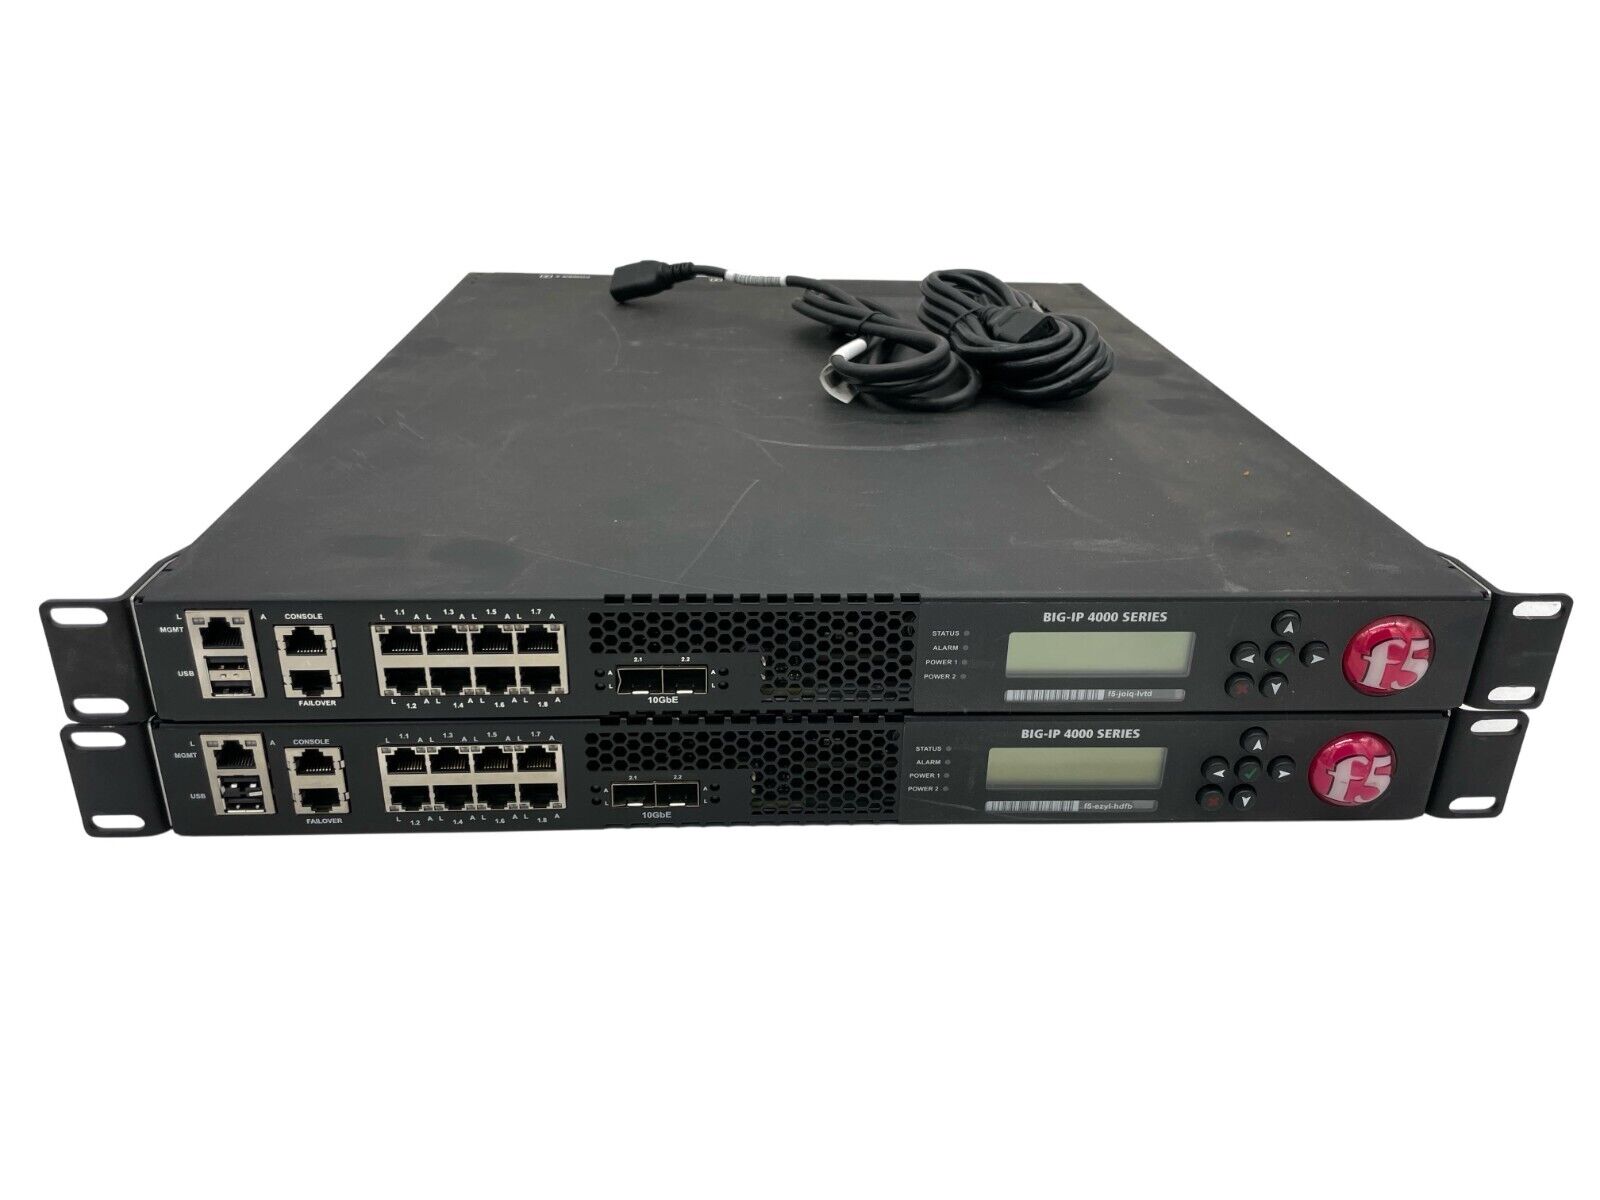 Lot of 2 F5 Networks BIG-IP 4000 Local Traffic Manager/Load Balancer Dual-AC